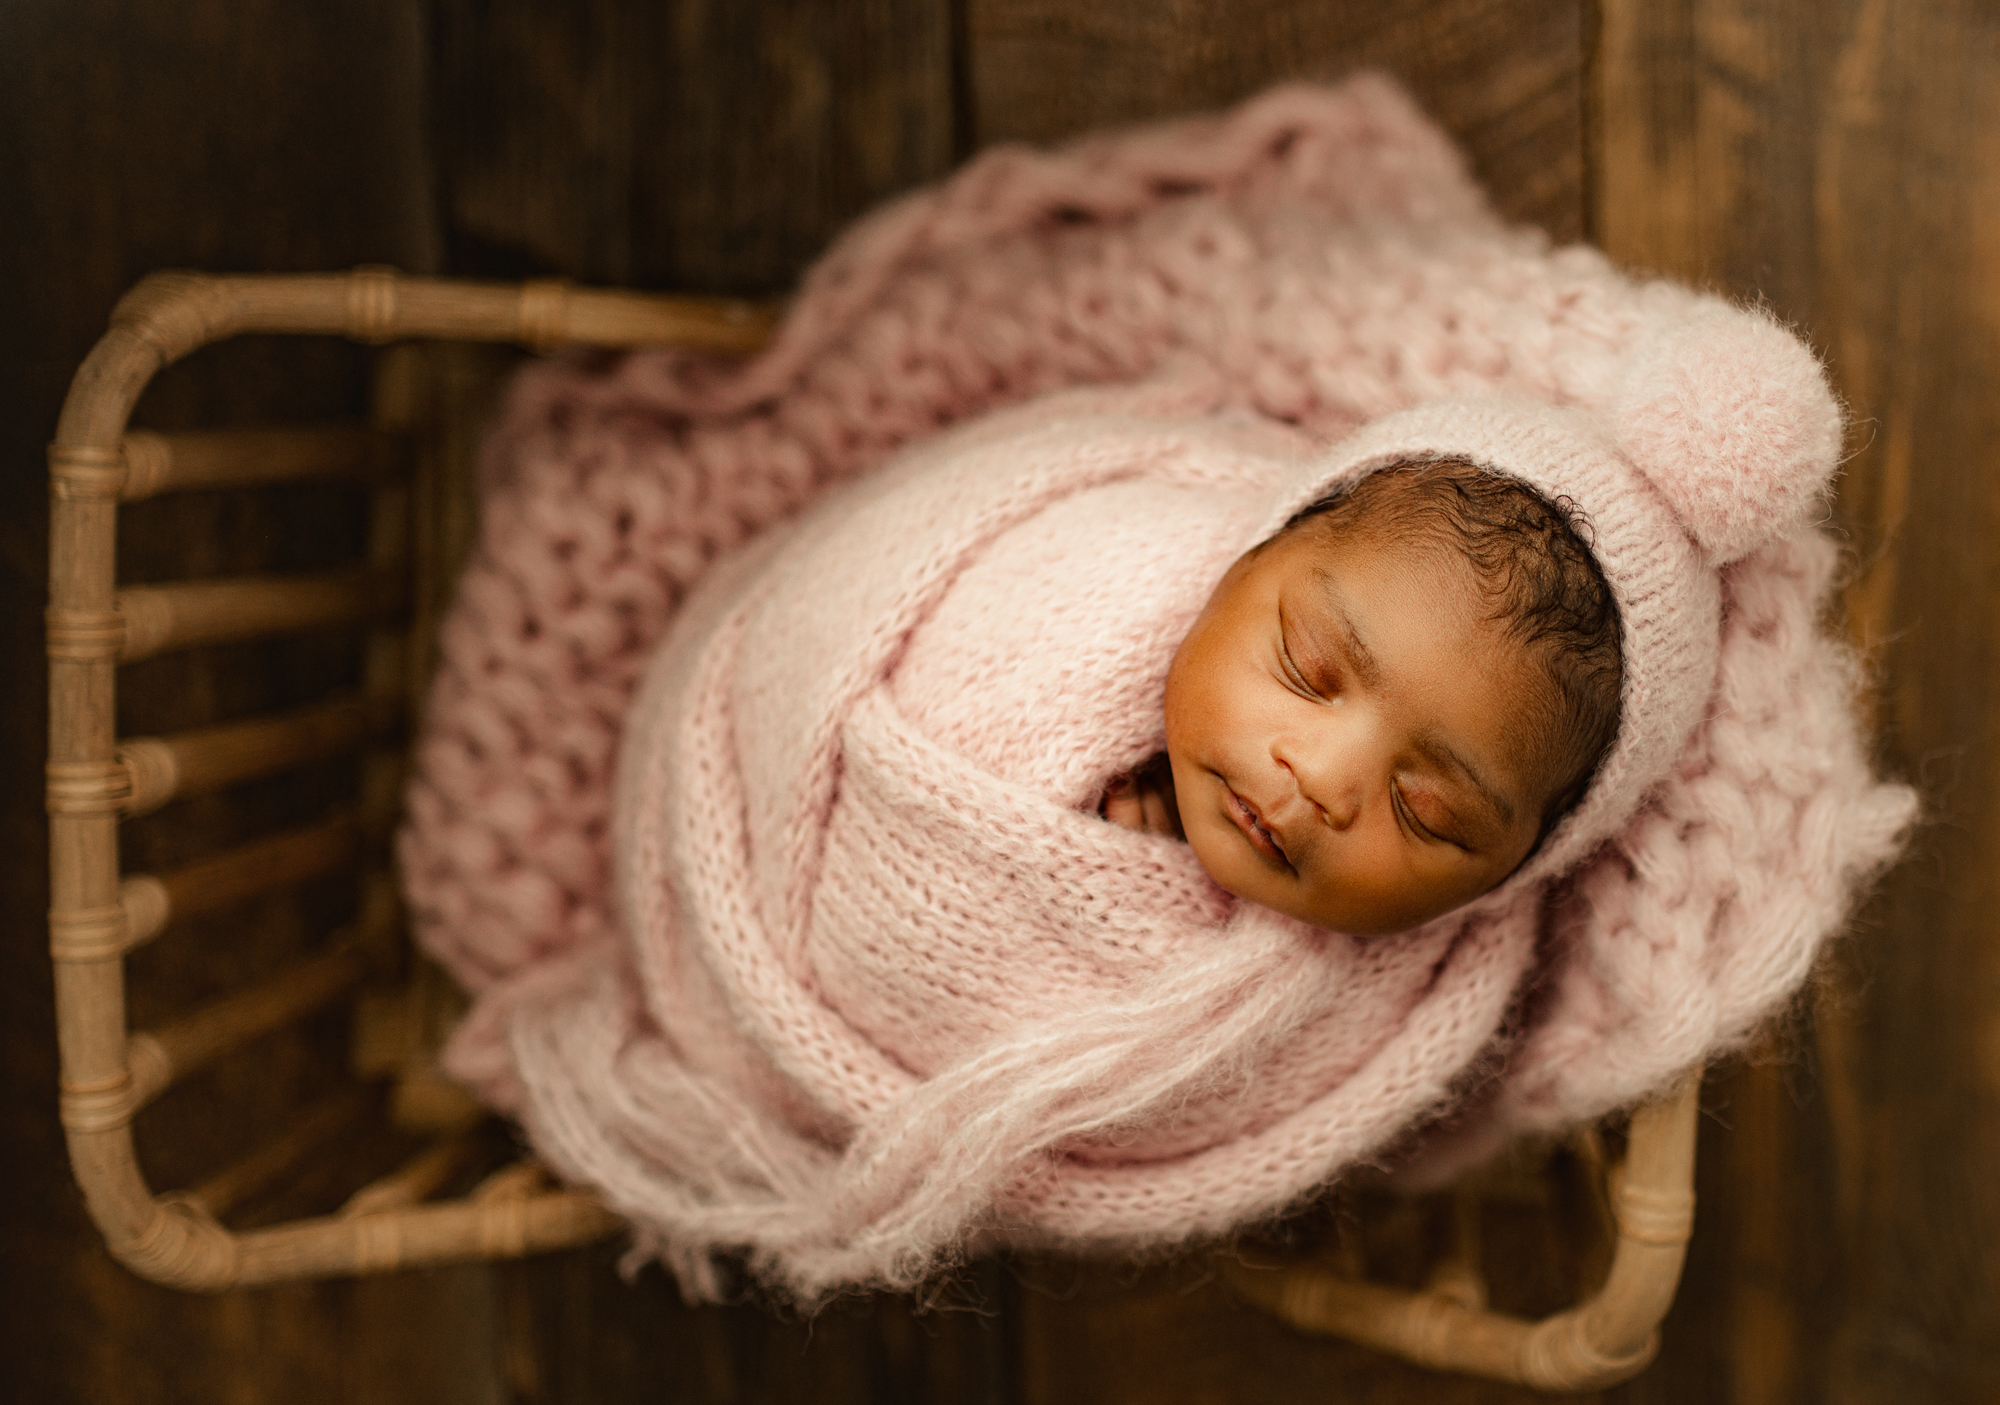 newborn baby in pink swaddled lying in baby bed prop